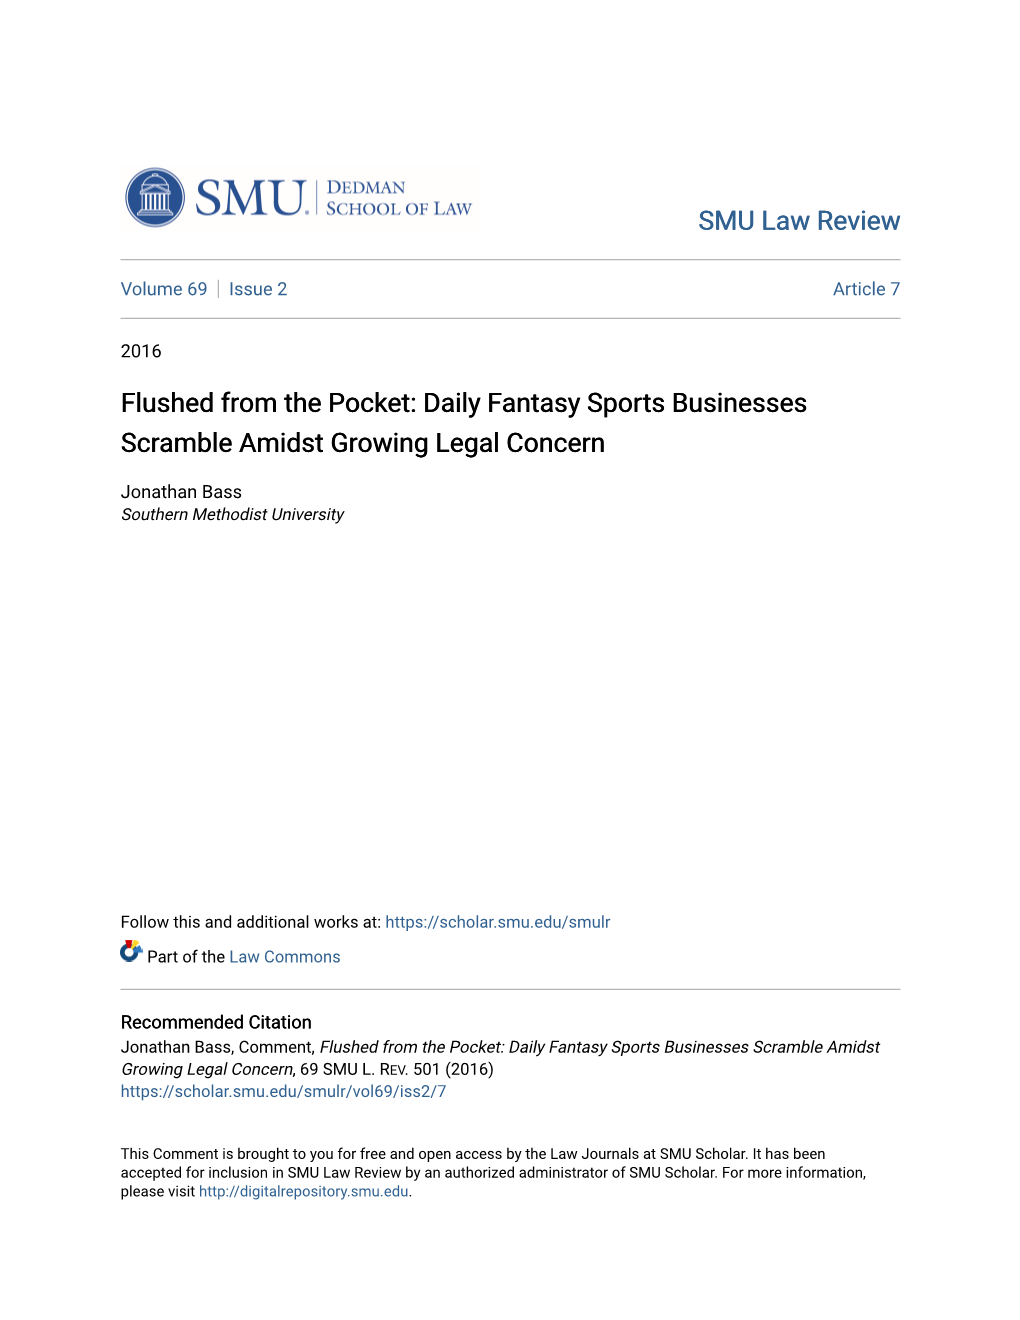 Flushed from the Pocket: Daily Fantasy Sports Businesses Scramble Amidst Growing Legal Concern